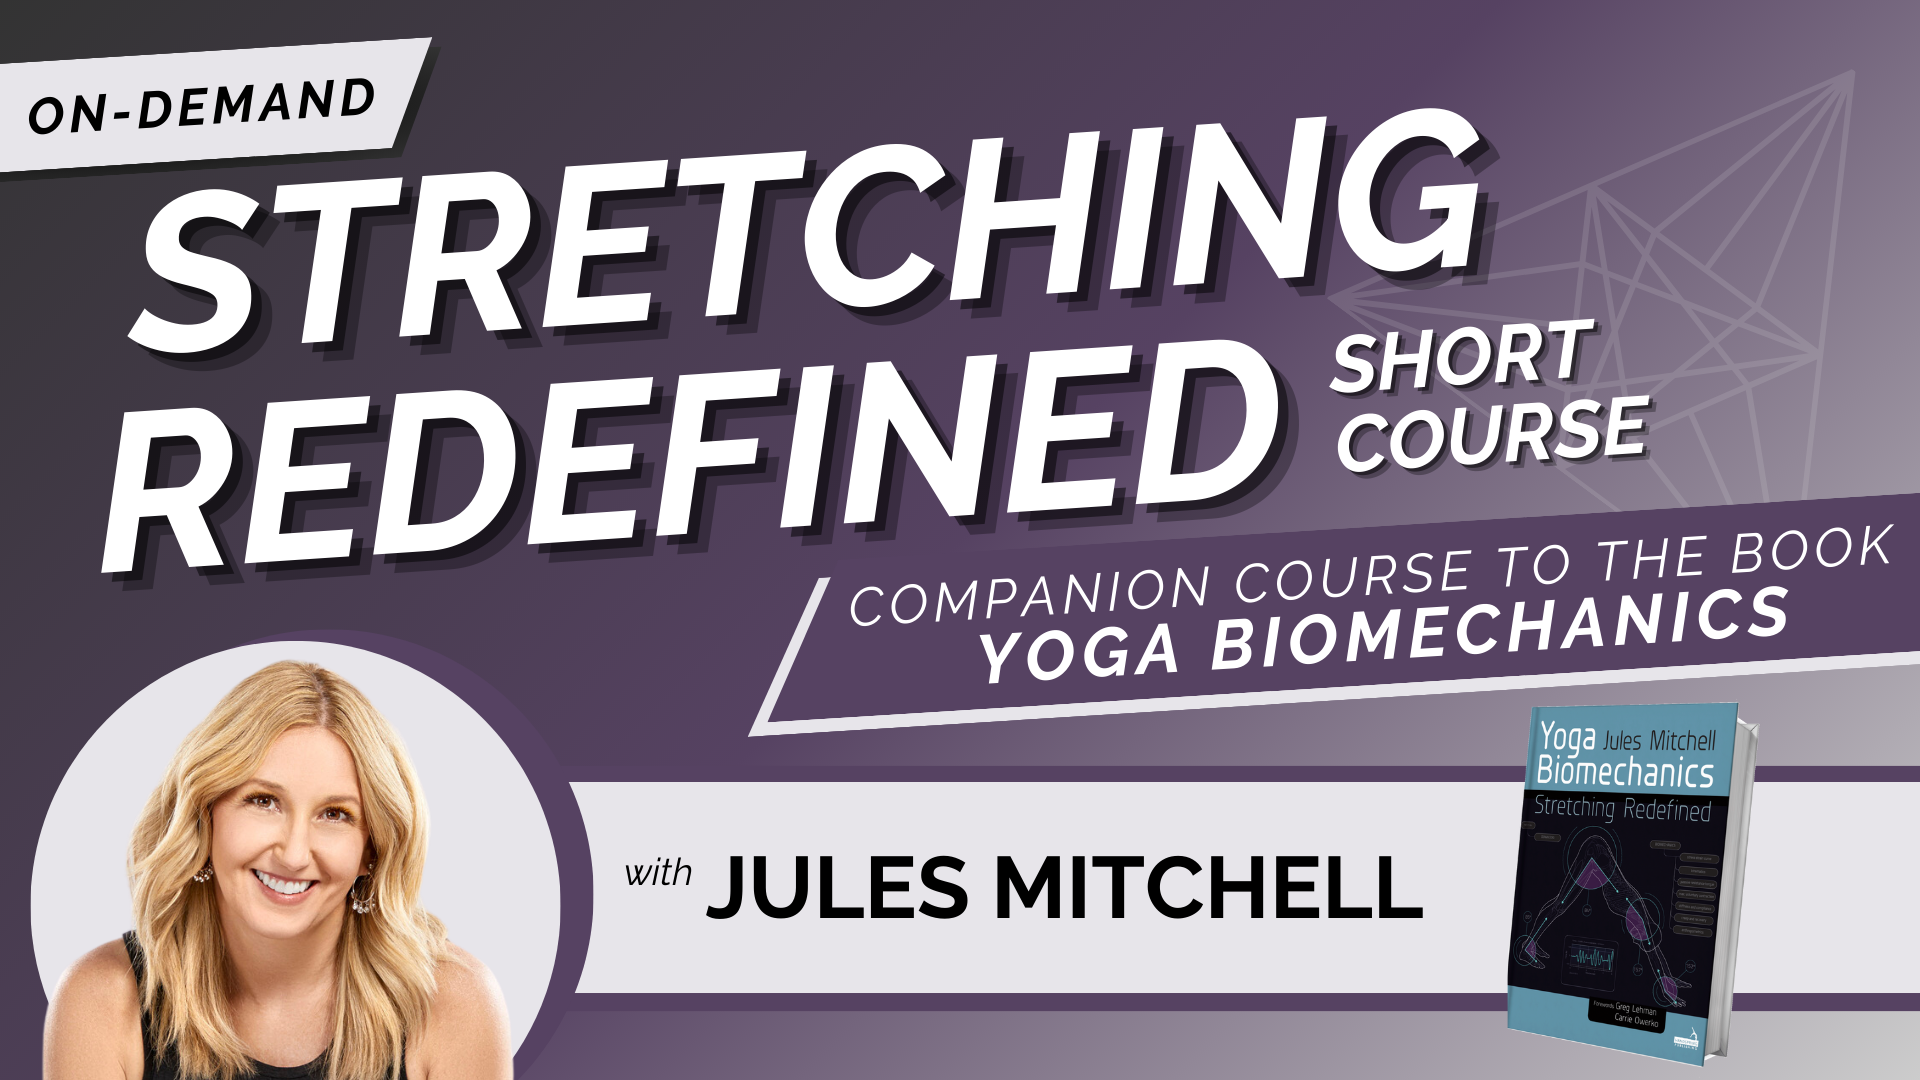 Stretching Redefined Short Course is a companion course for Jules' book